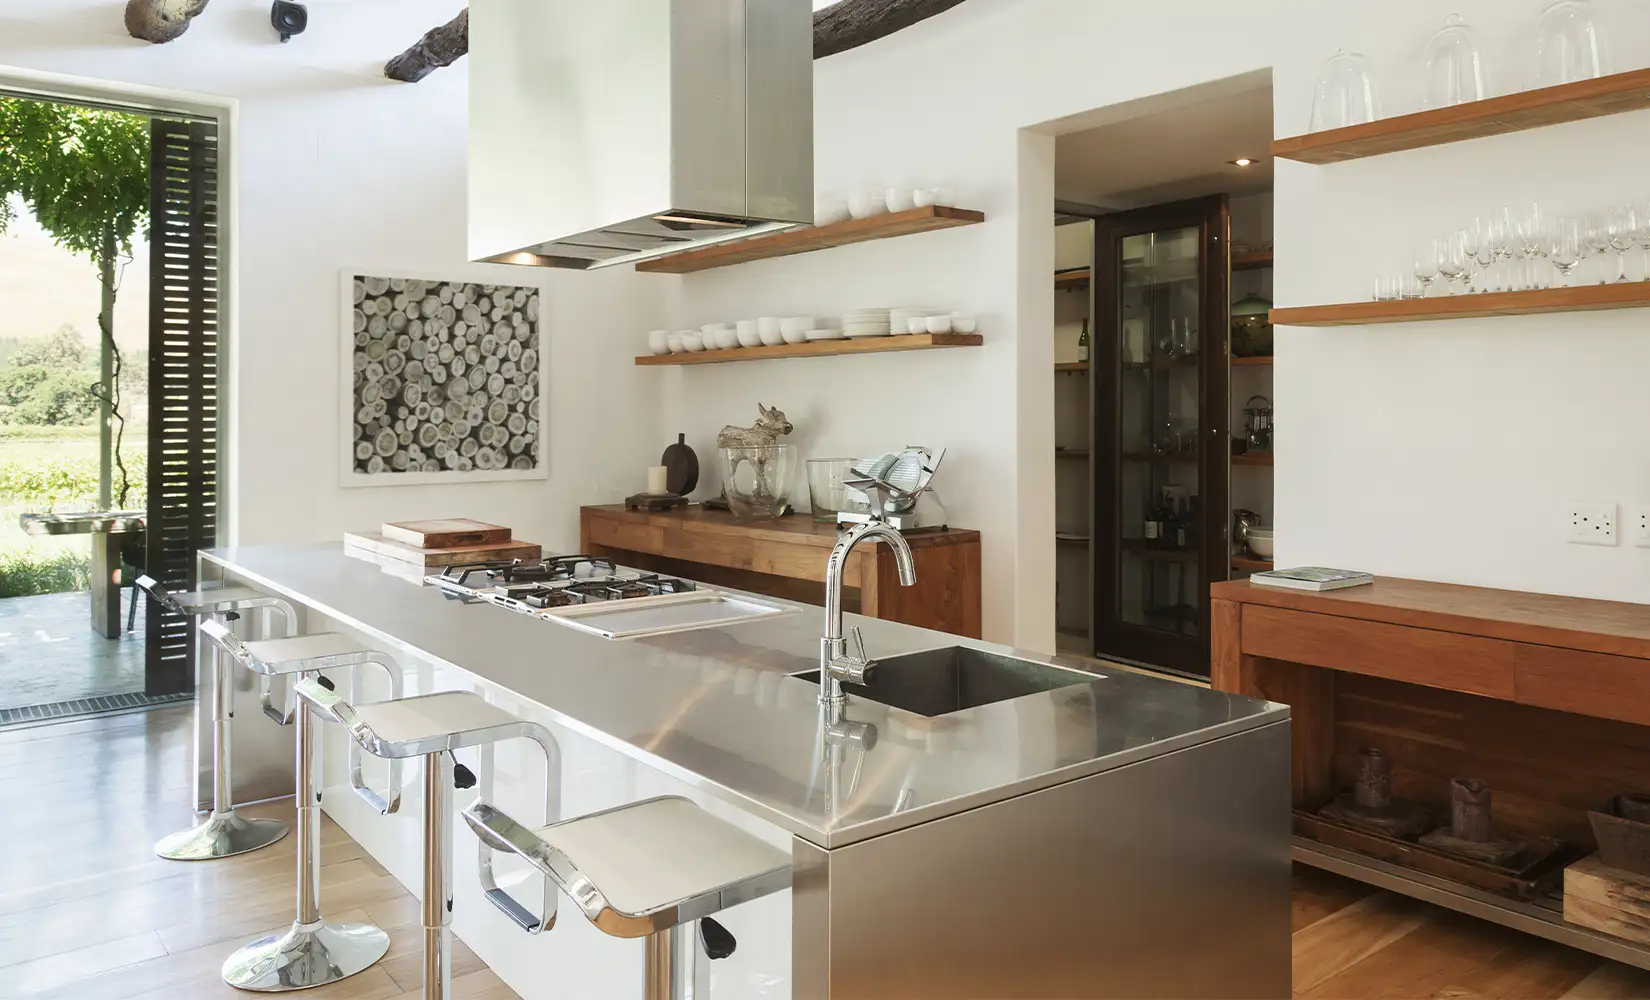 Modern kitchen with stainless steel countertop and silver faucet.